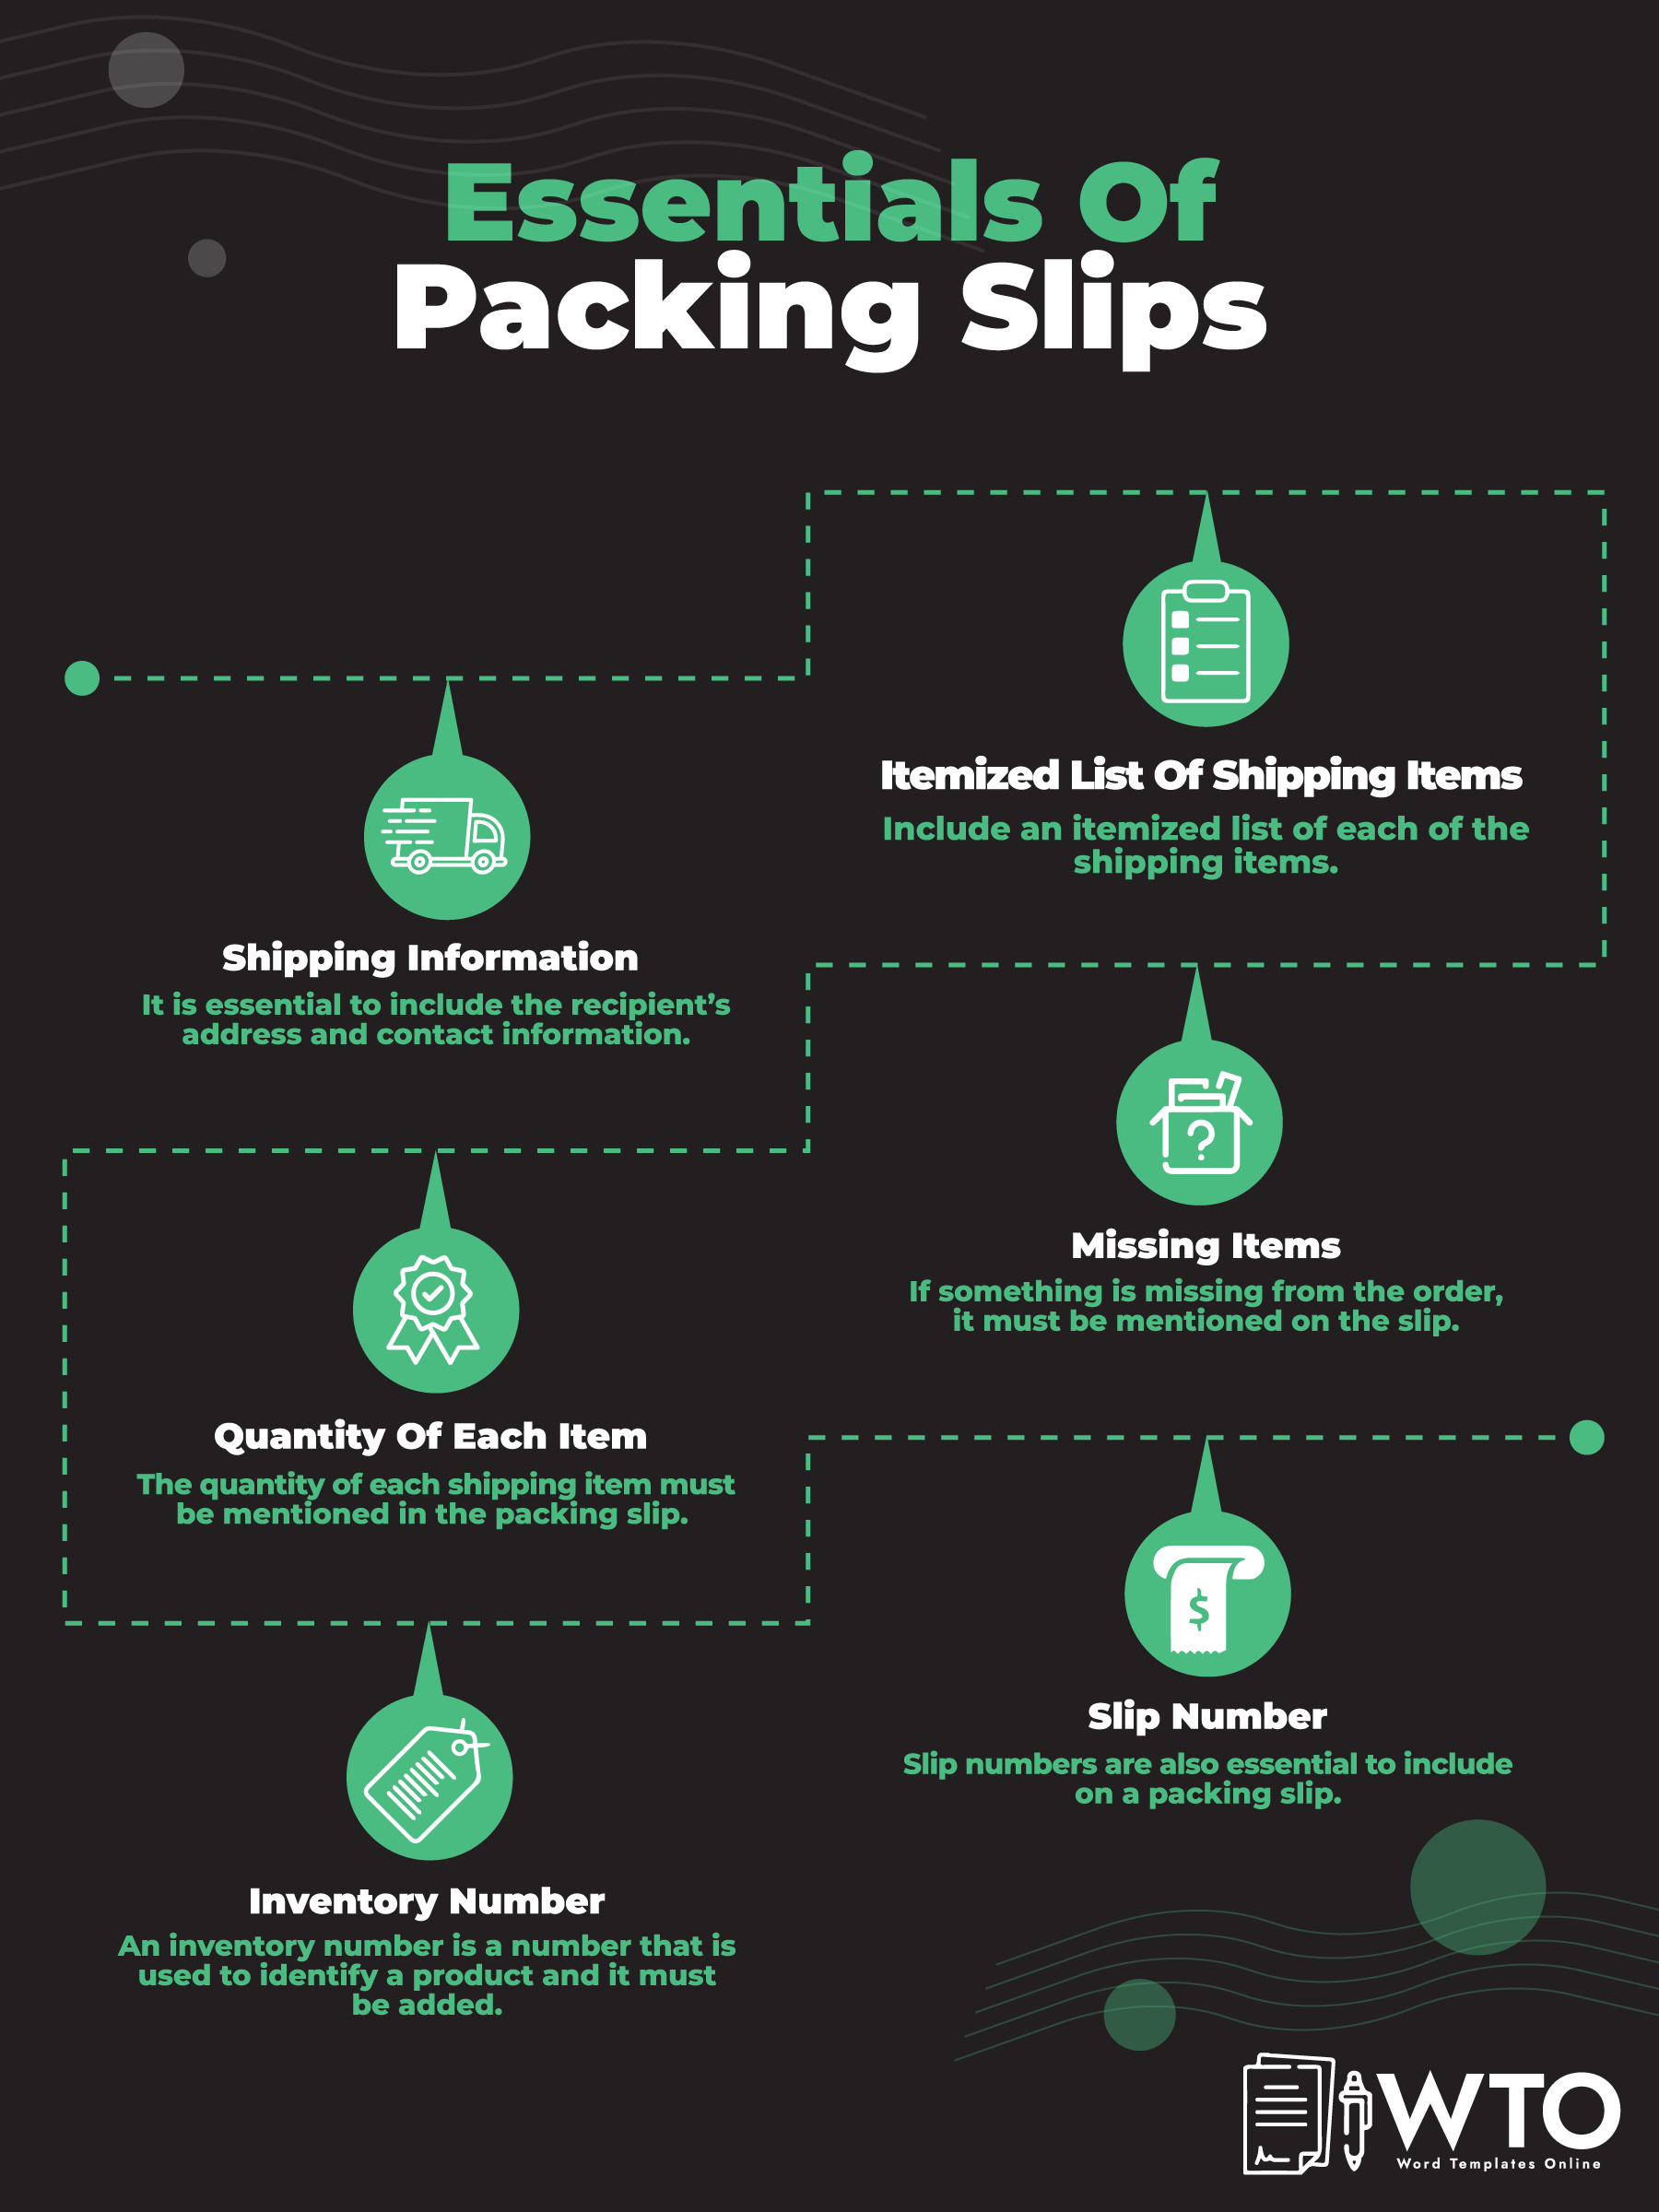 This infographic contains the essentials of packing slips.